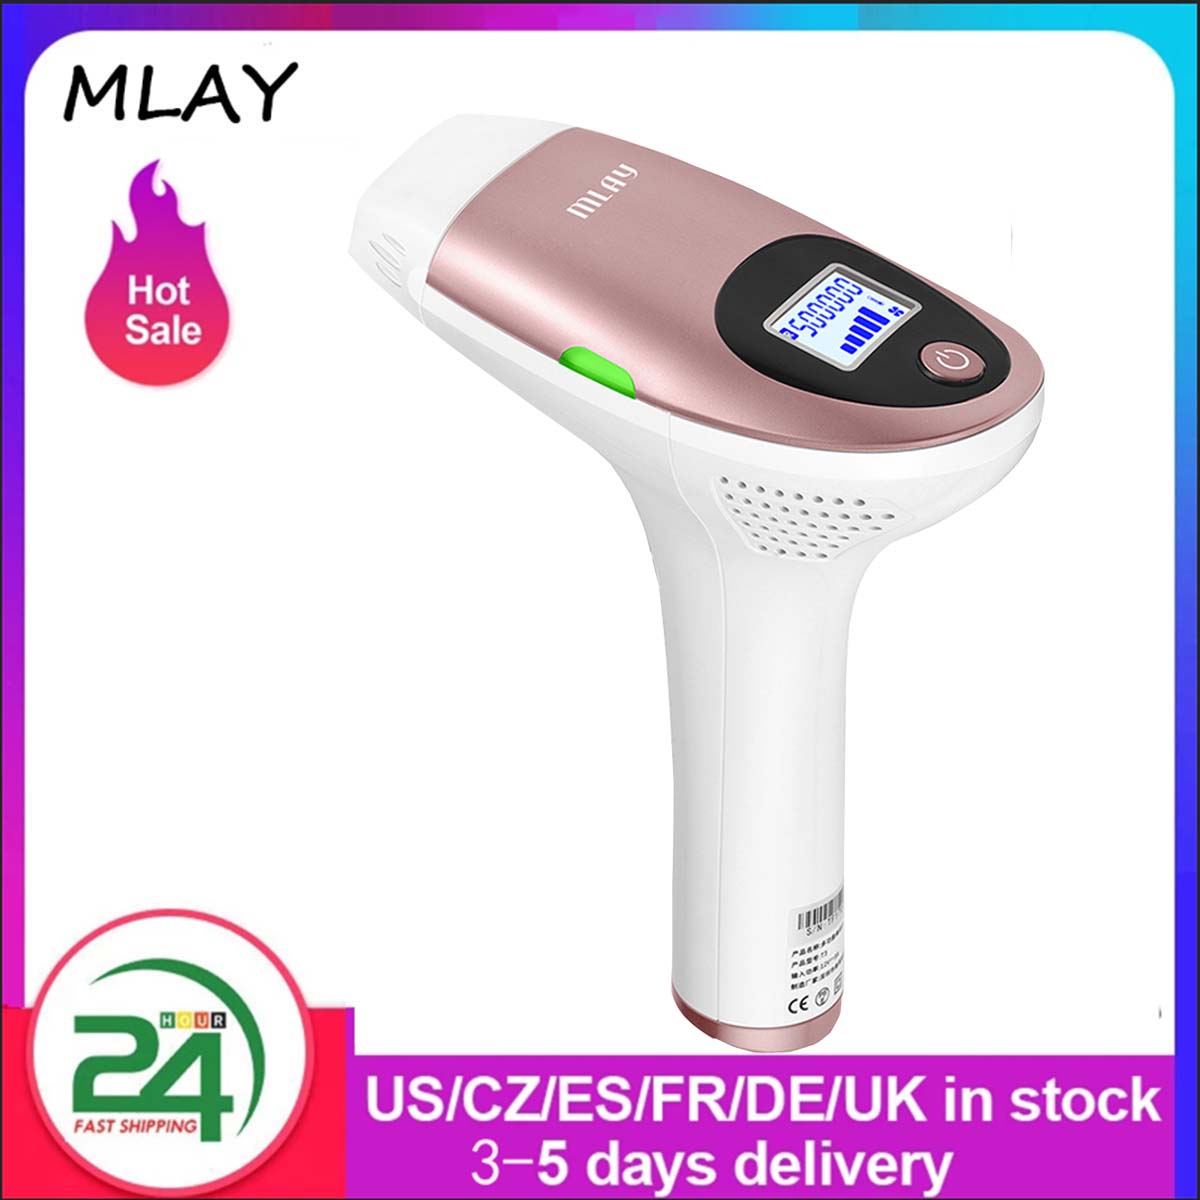 MLAY T3 IPL Laser Hair Removal Device